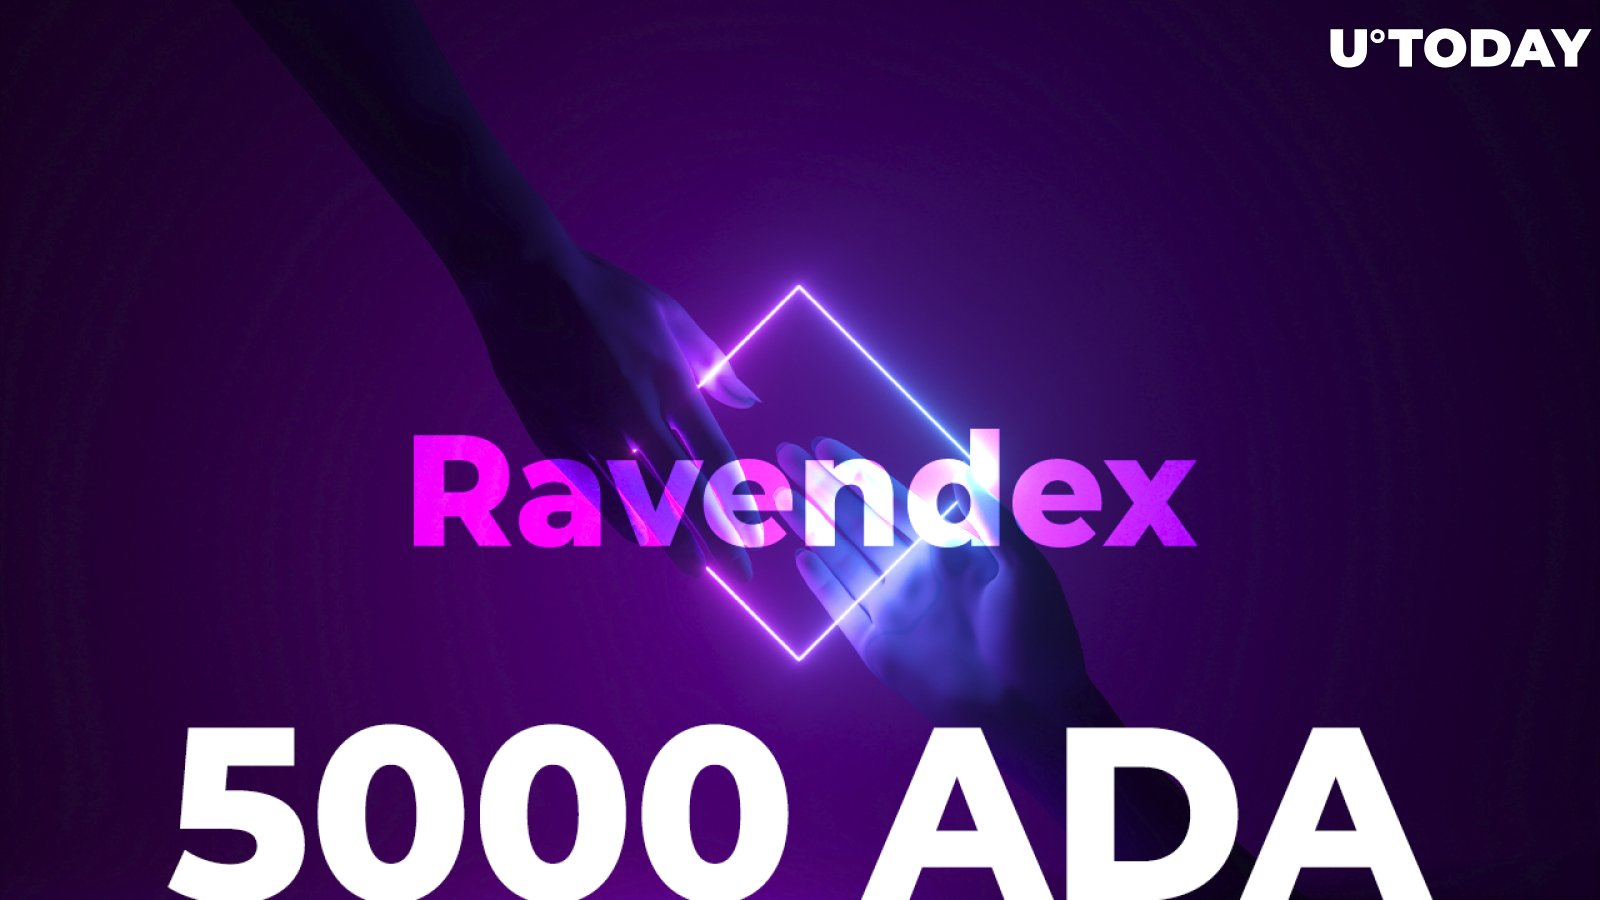 Cardano-Based DEX Ravendex Launches 5,000 ADA Giveaway: Details